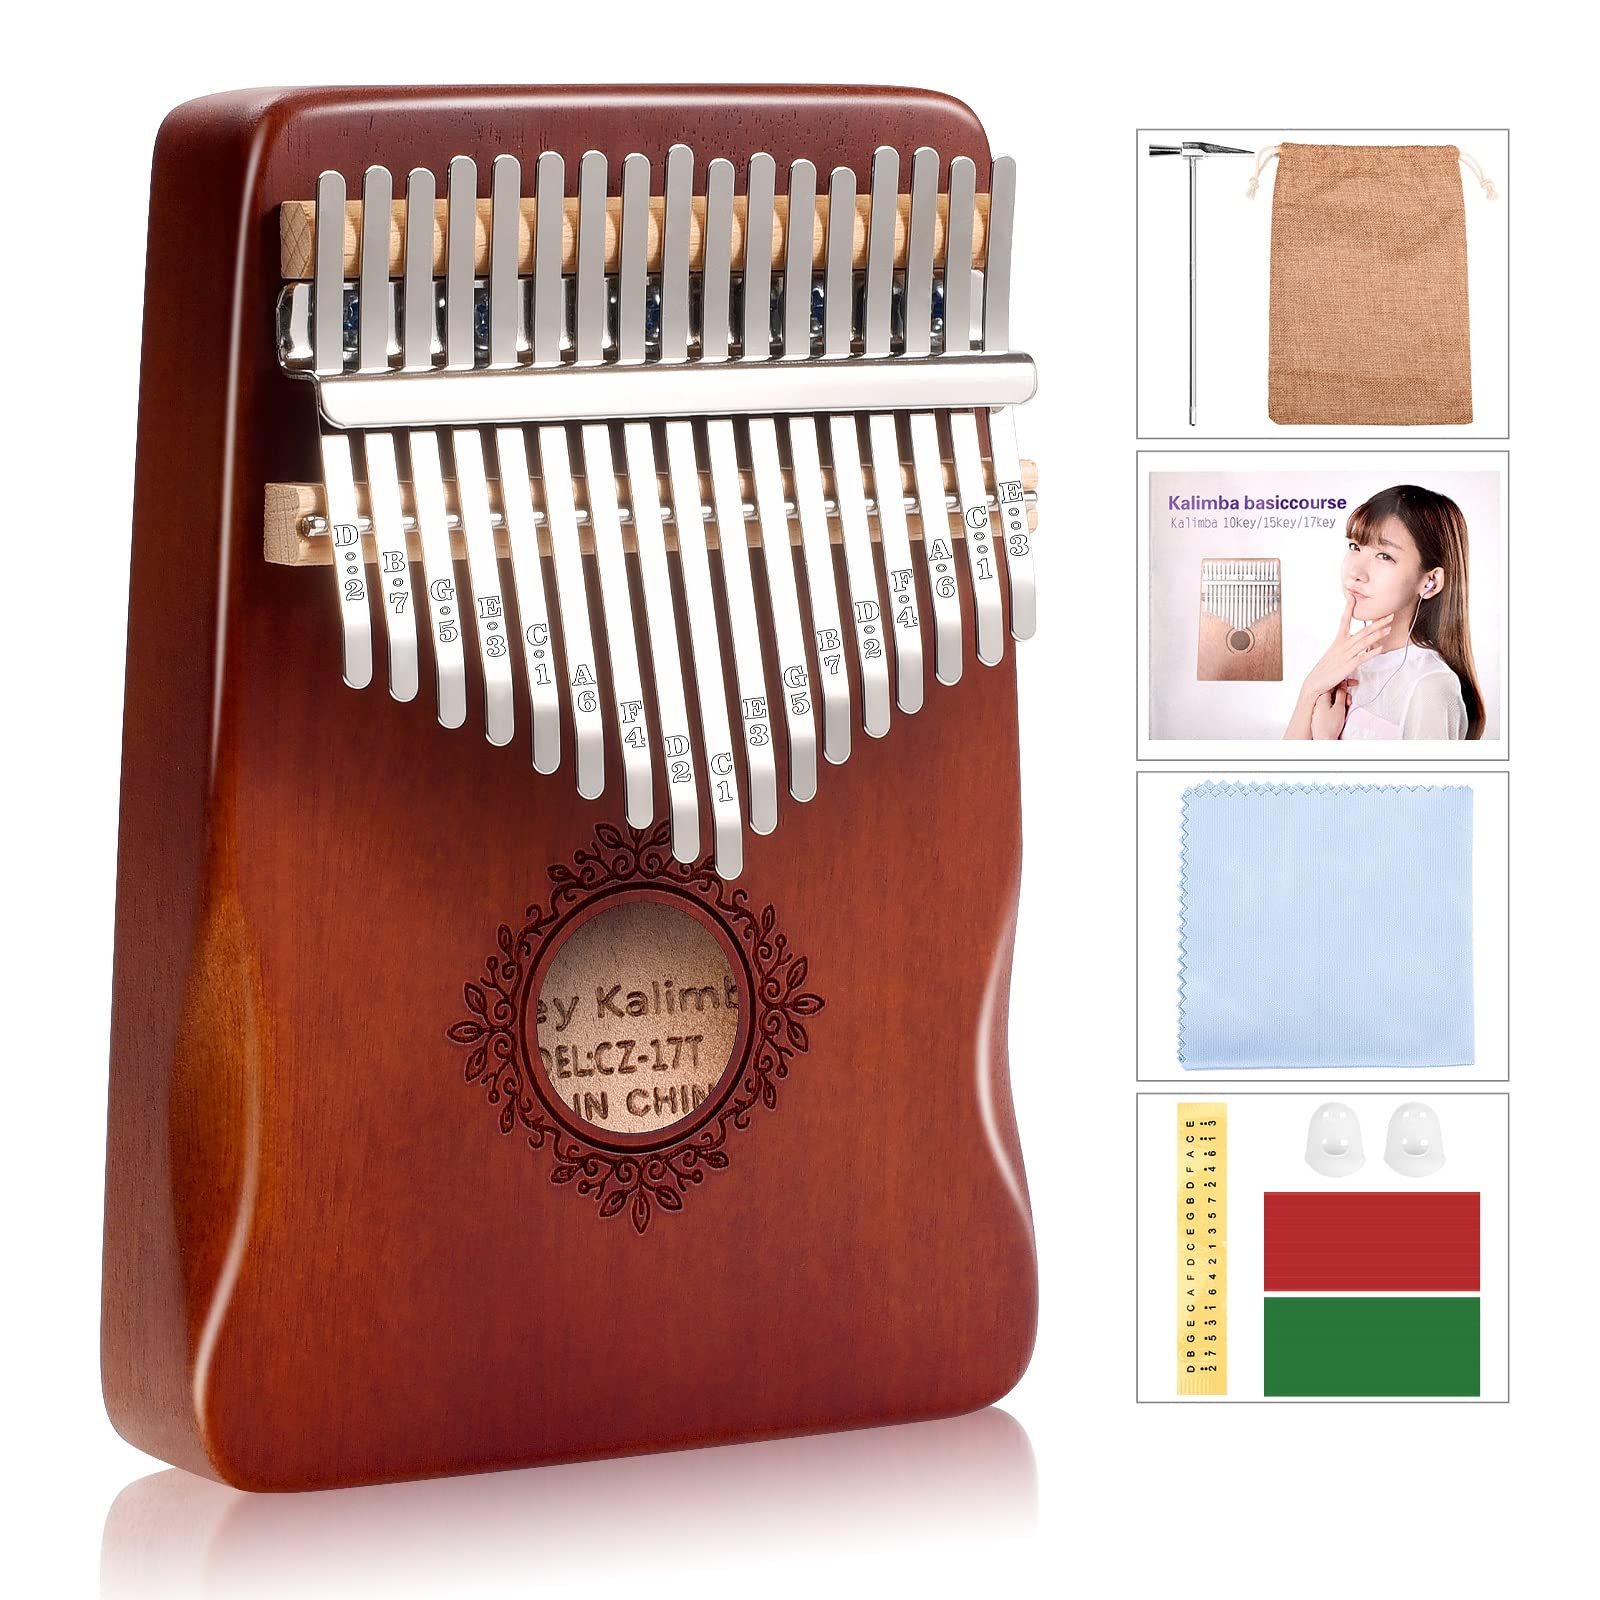 Kalimba Thumb Piano 17 Keys, Portable Mbira Finger Piano, Easy to Learn Musical Instrument Gift for Kids and Adult Beginners, Brown1